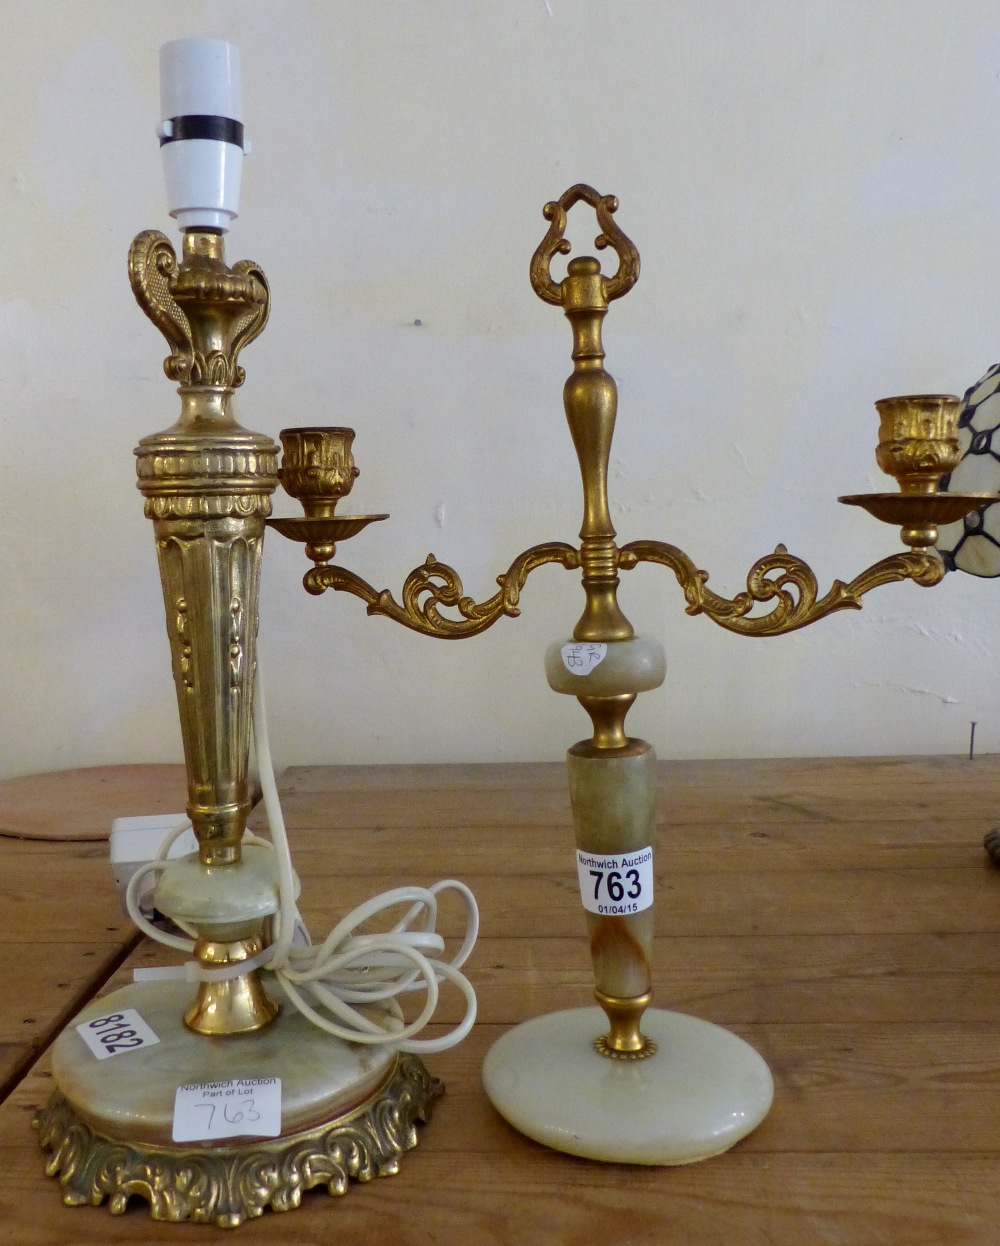 Onyx and gilt effect candelabra and lamp